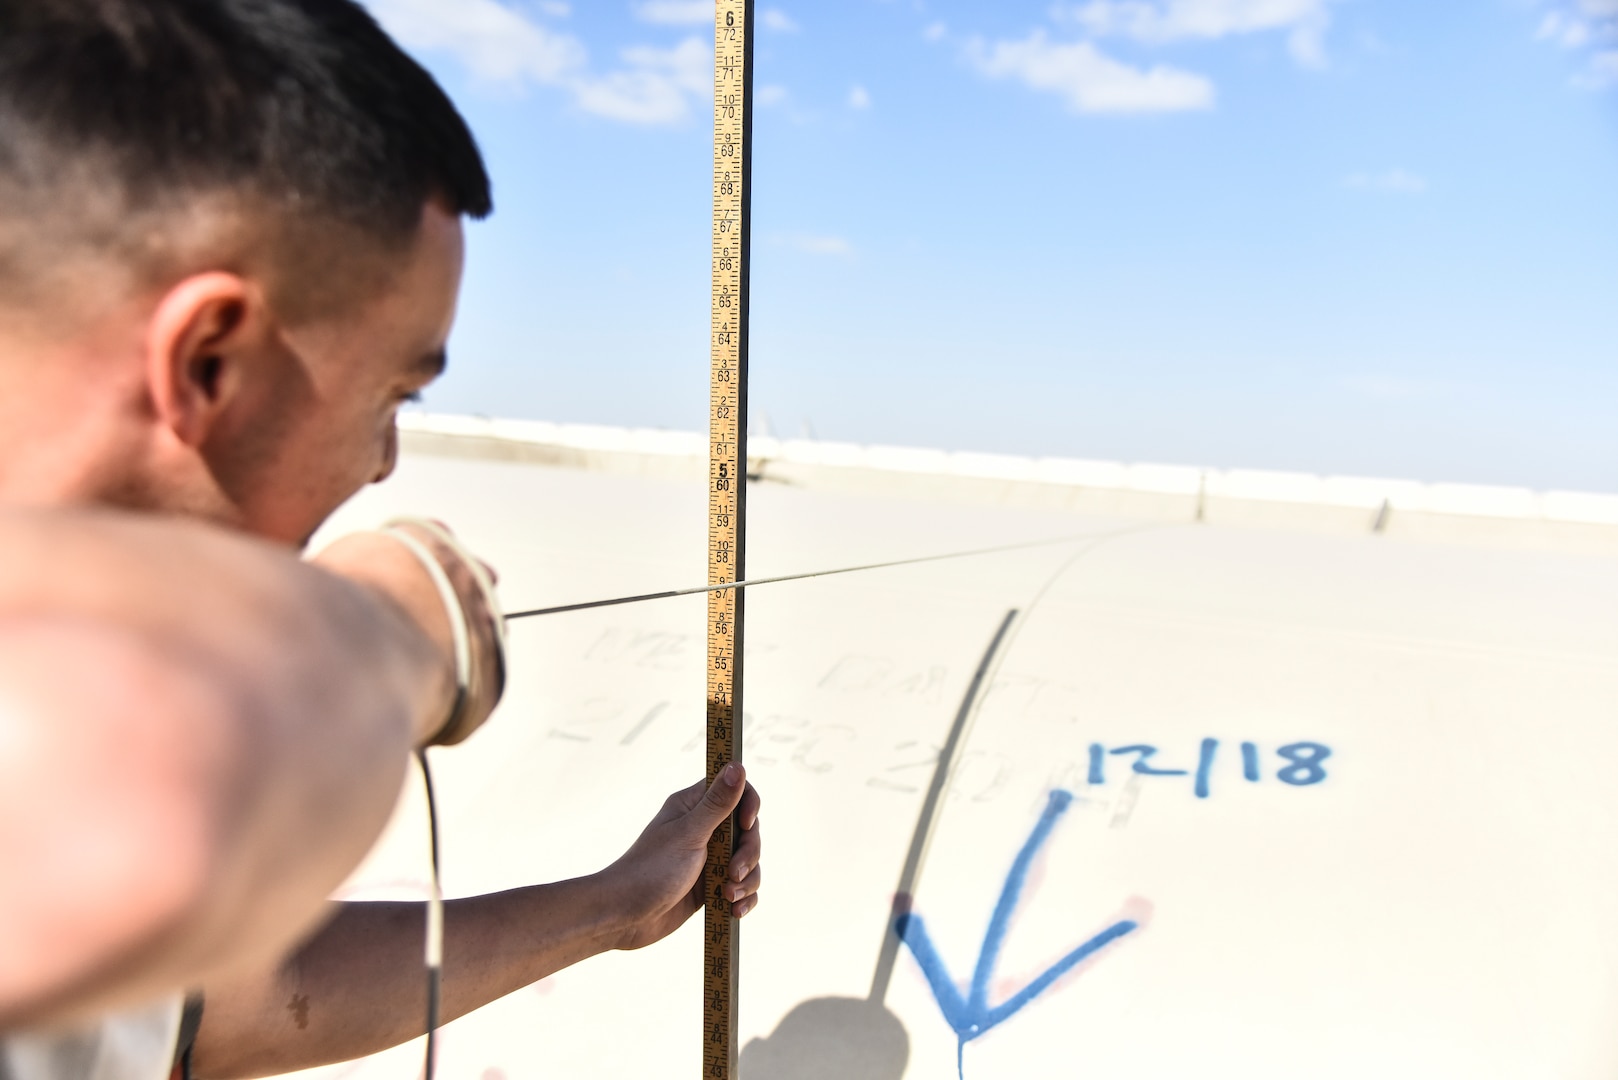 U.S. Air Force Senior Airman Tyler Ruano, 380th Expeditionary Logistics Readiness Squadron fuels operations technician, measures a fuel bladder at Al Dhafra Air Base, United Arab Emirates, Jan. 21, 2019. The fuel bladders have approximately the same thickness of a water bed liner, which is strong enough to hold 210,000 gallons of fuel. (U.S. Air Force photo by Senior Airman Mya M. Crosby)